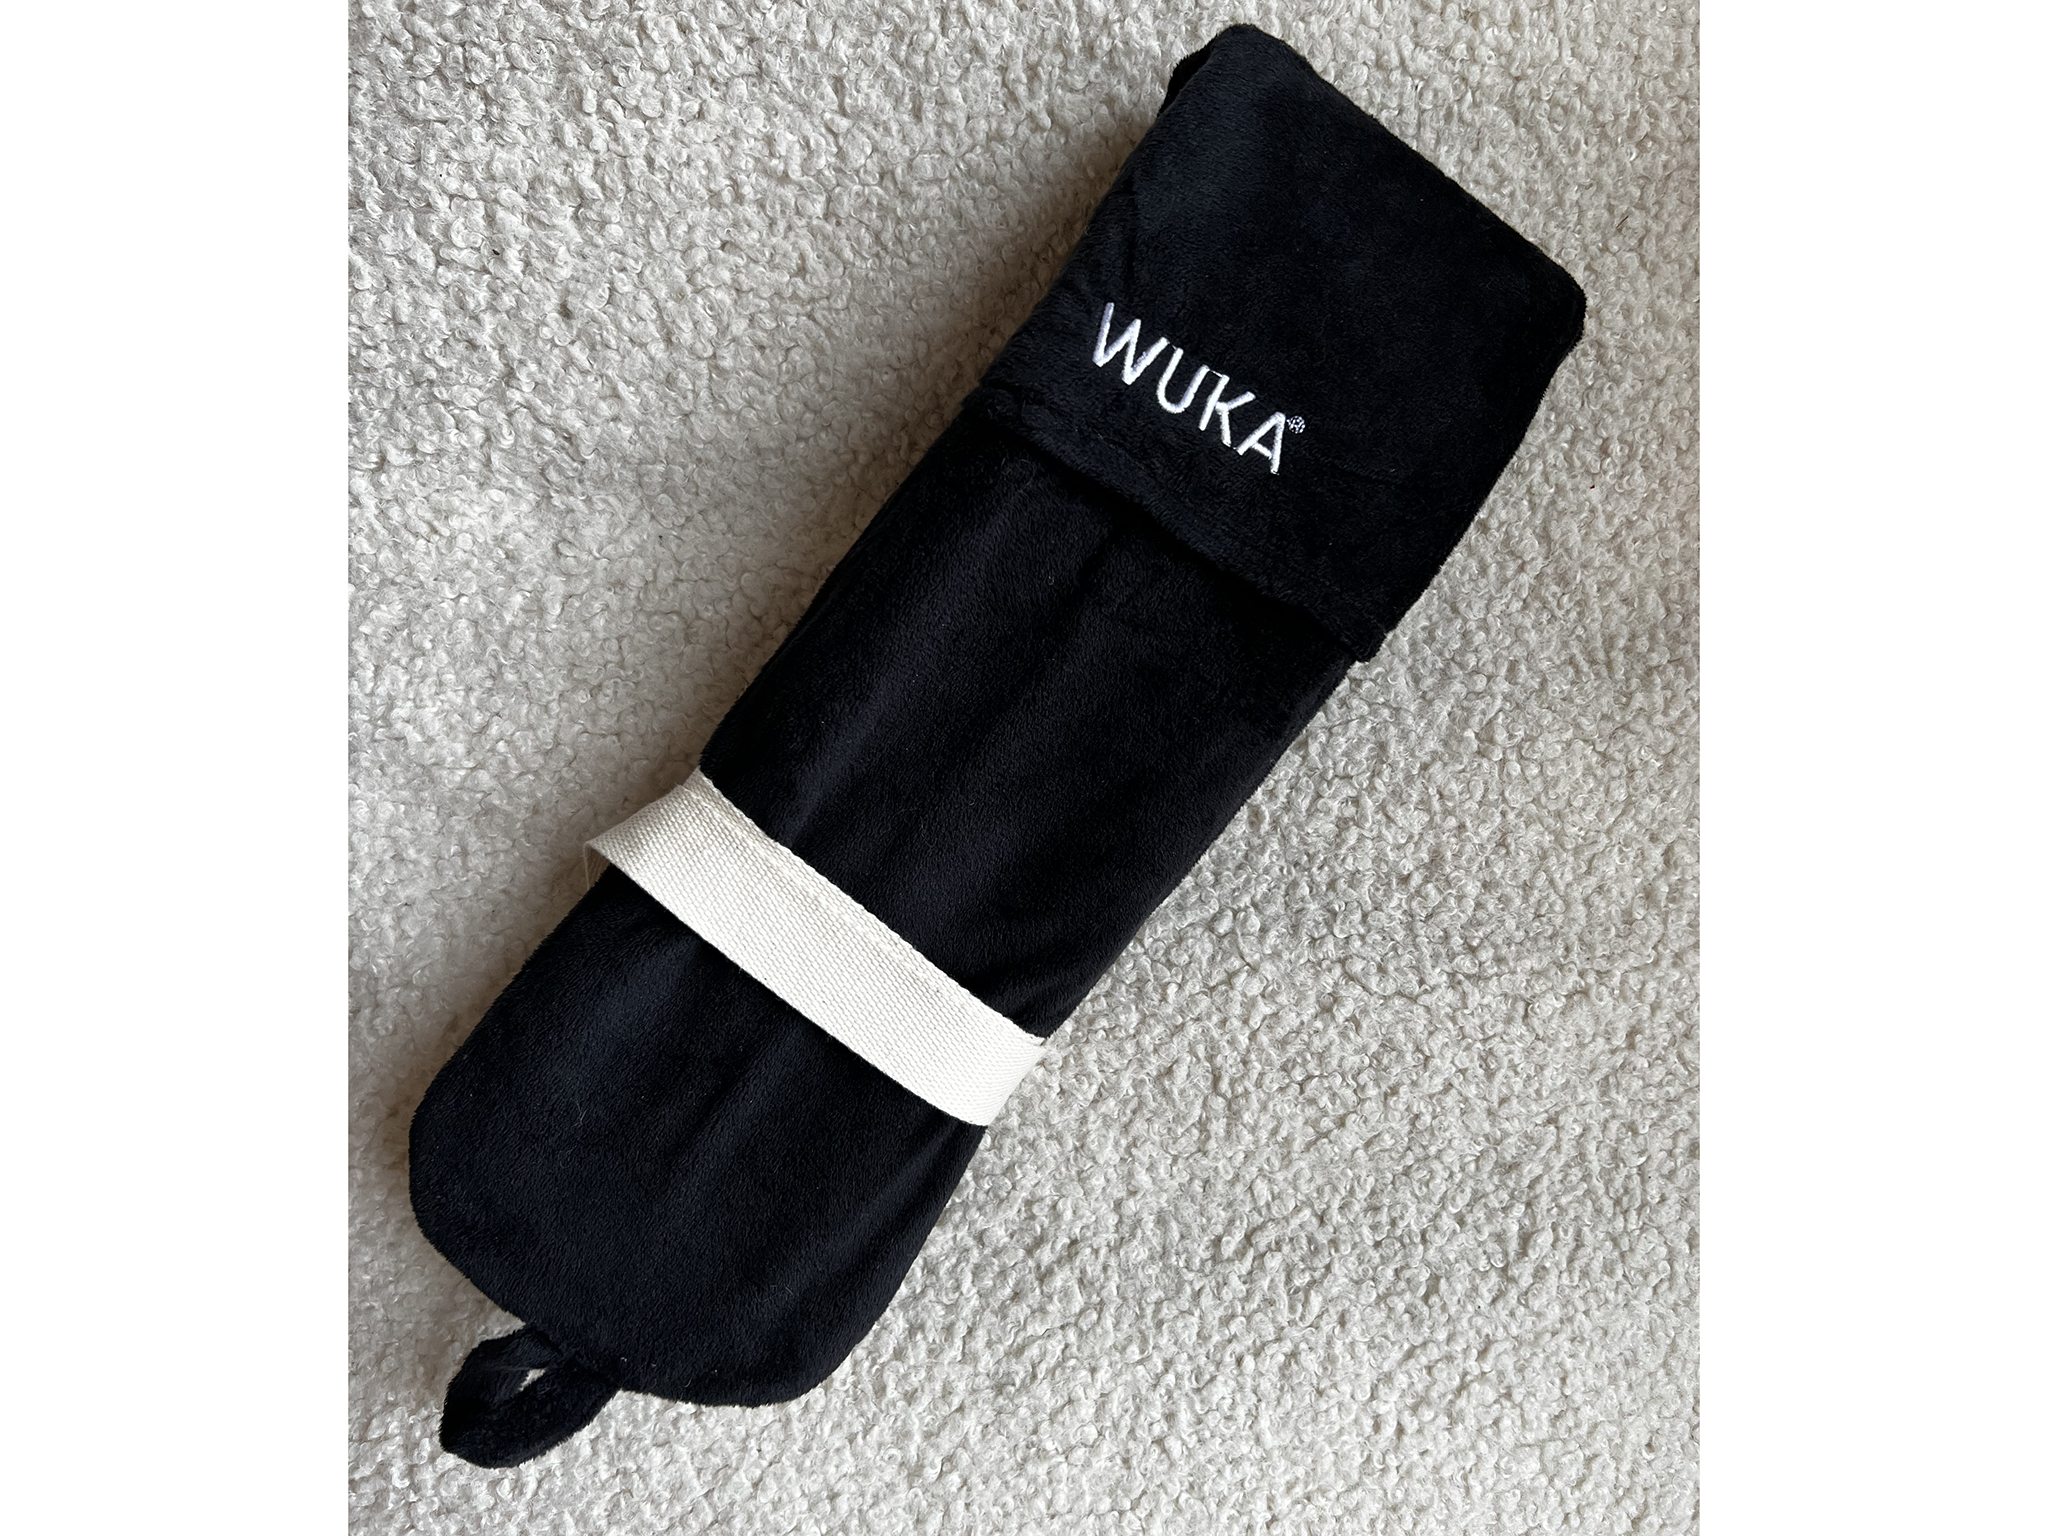 wuka-wearable-hot-water-bottle-indybest-review.png